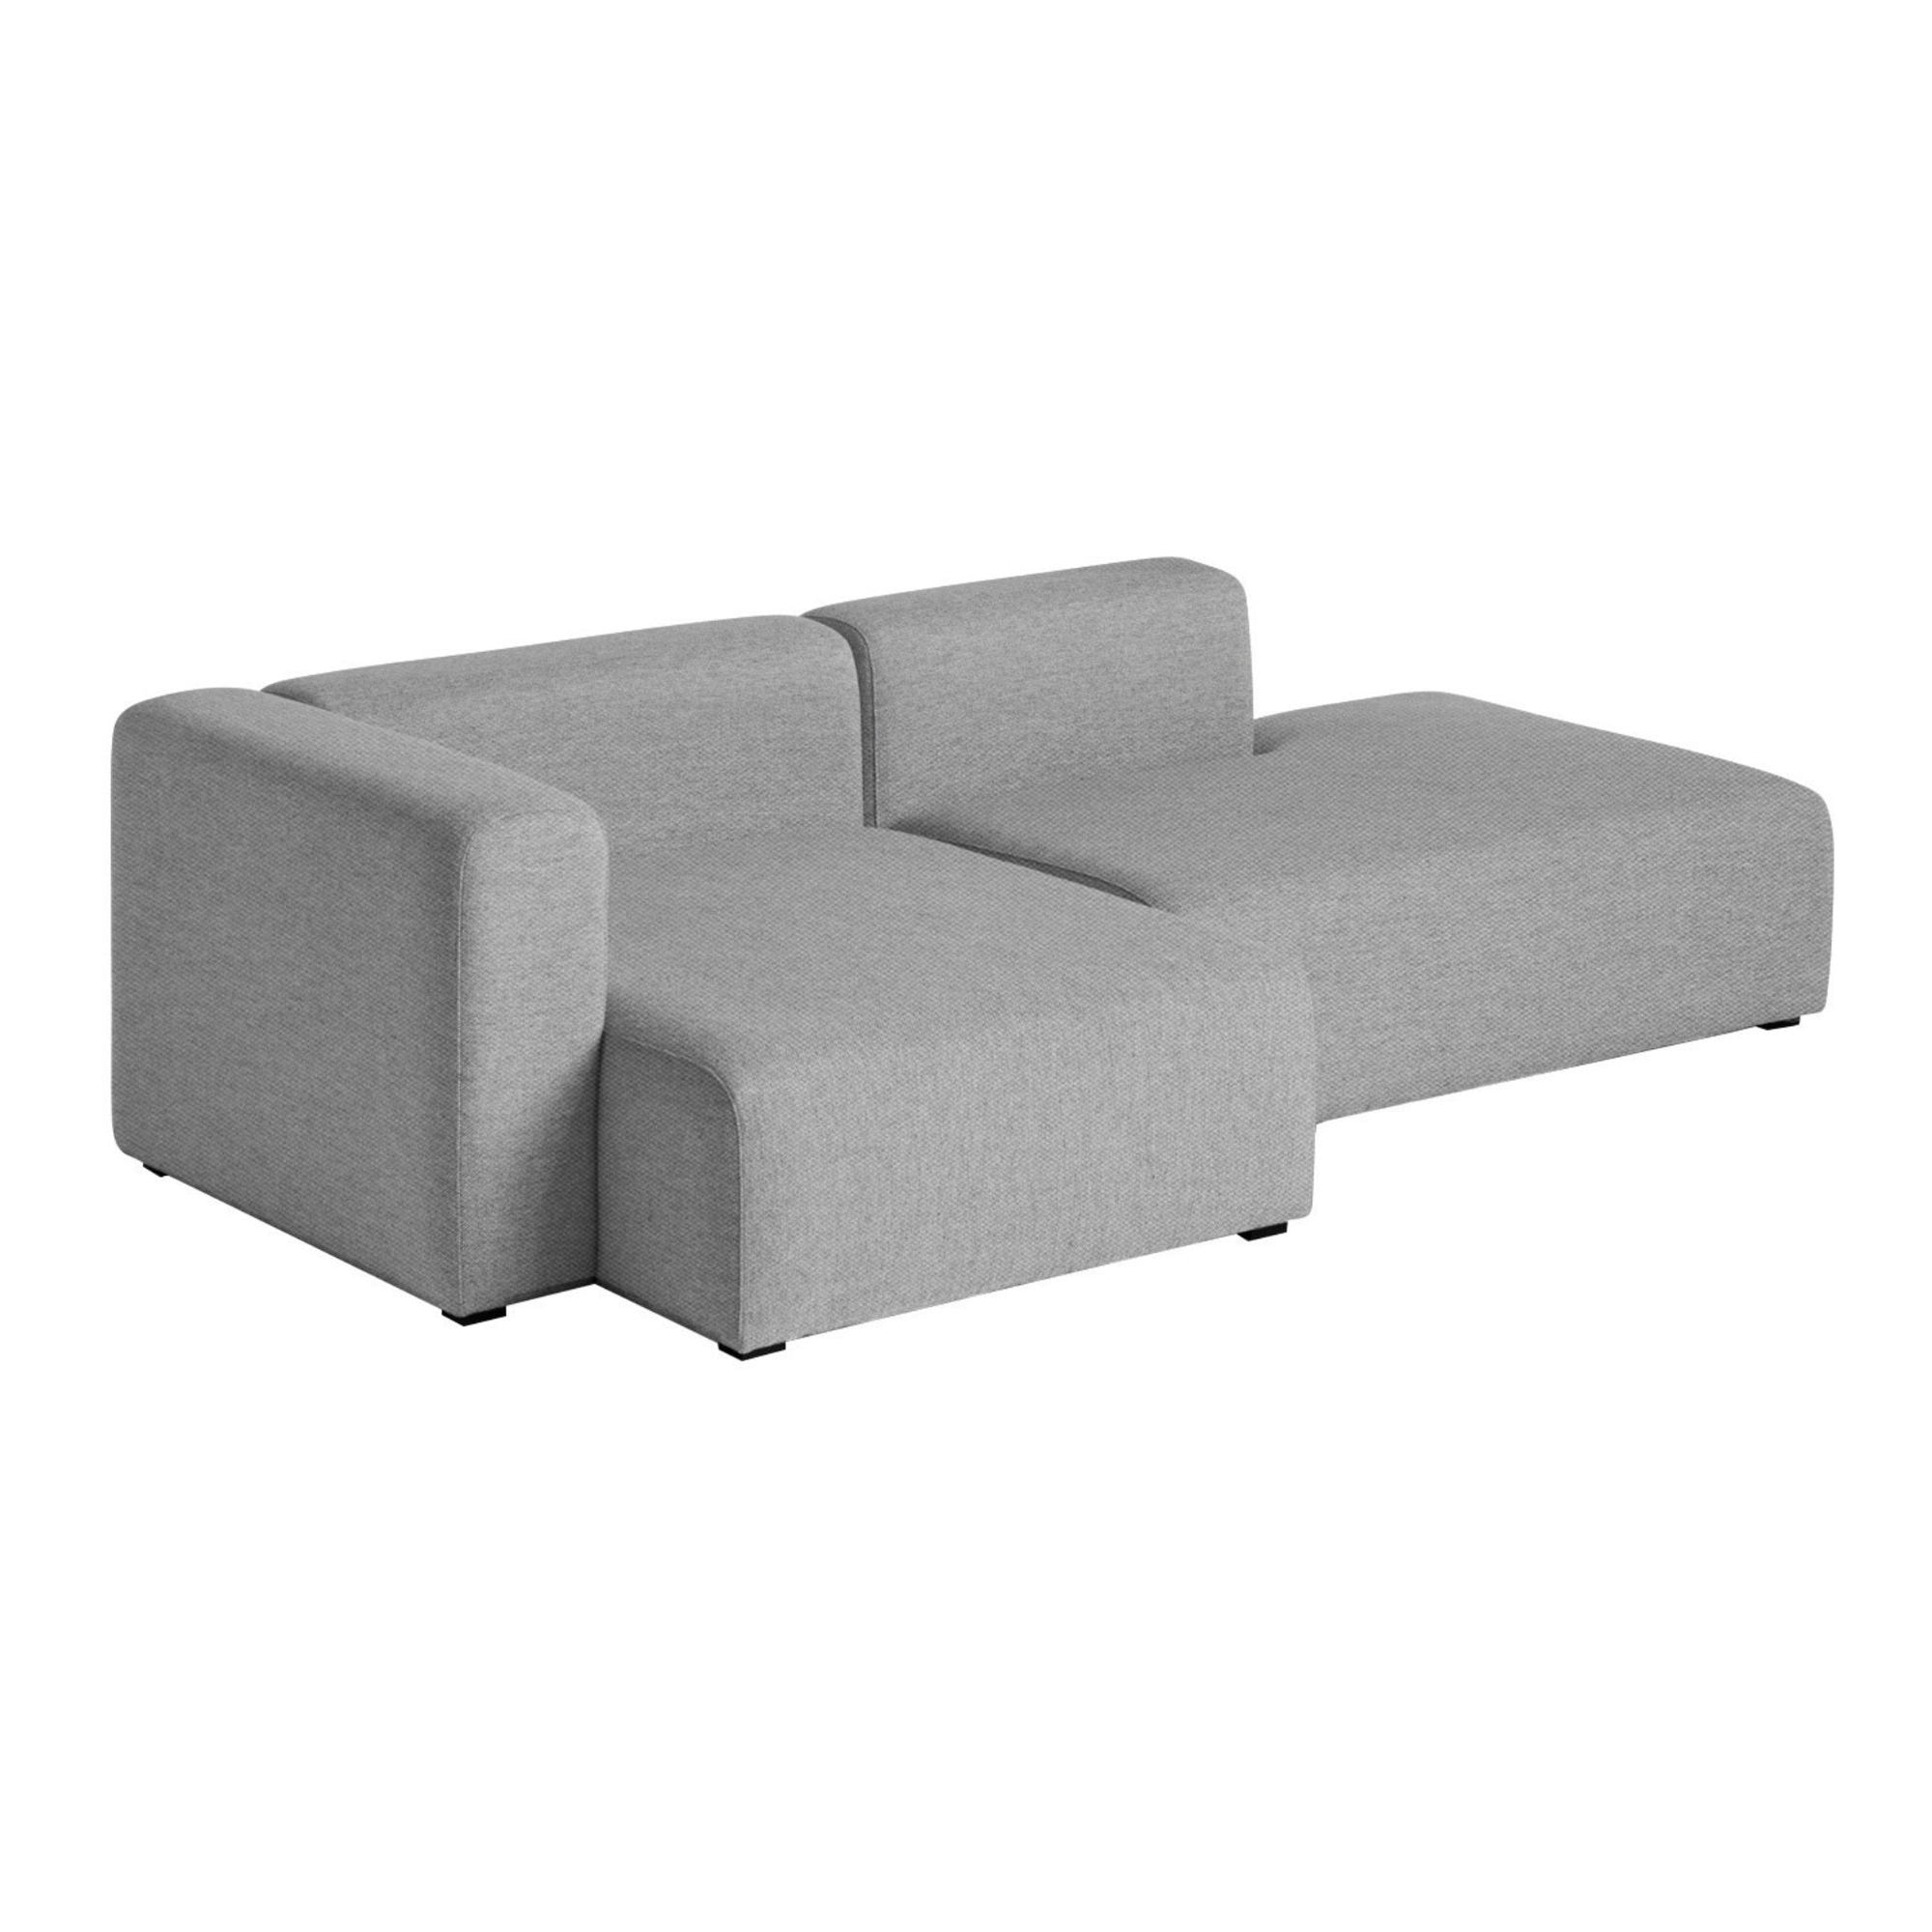 Hay Mags 2.5 seater lounge sofa, steelcut trio 133